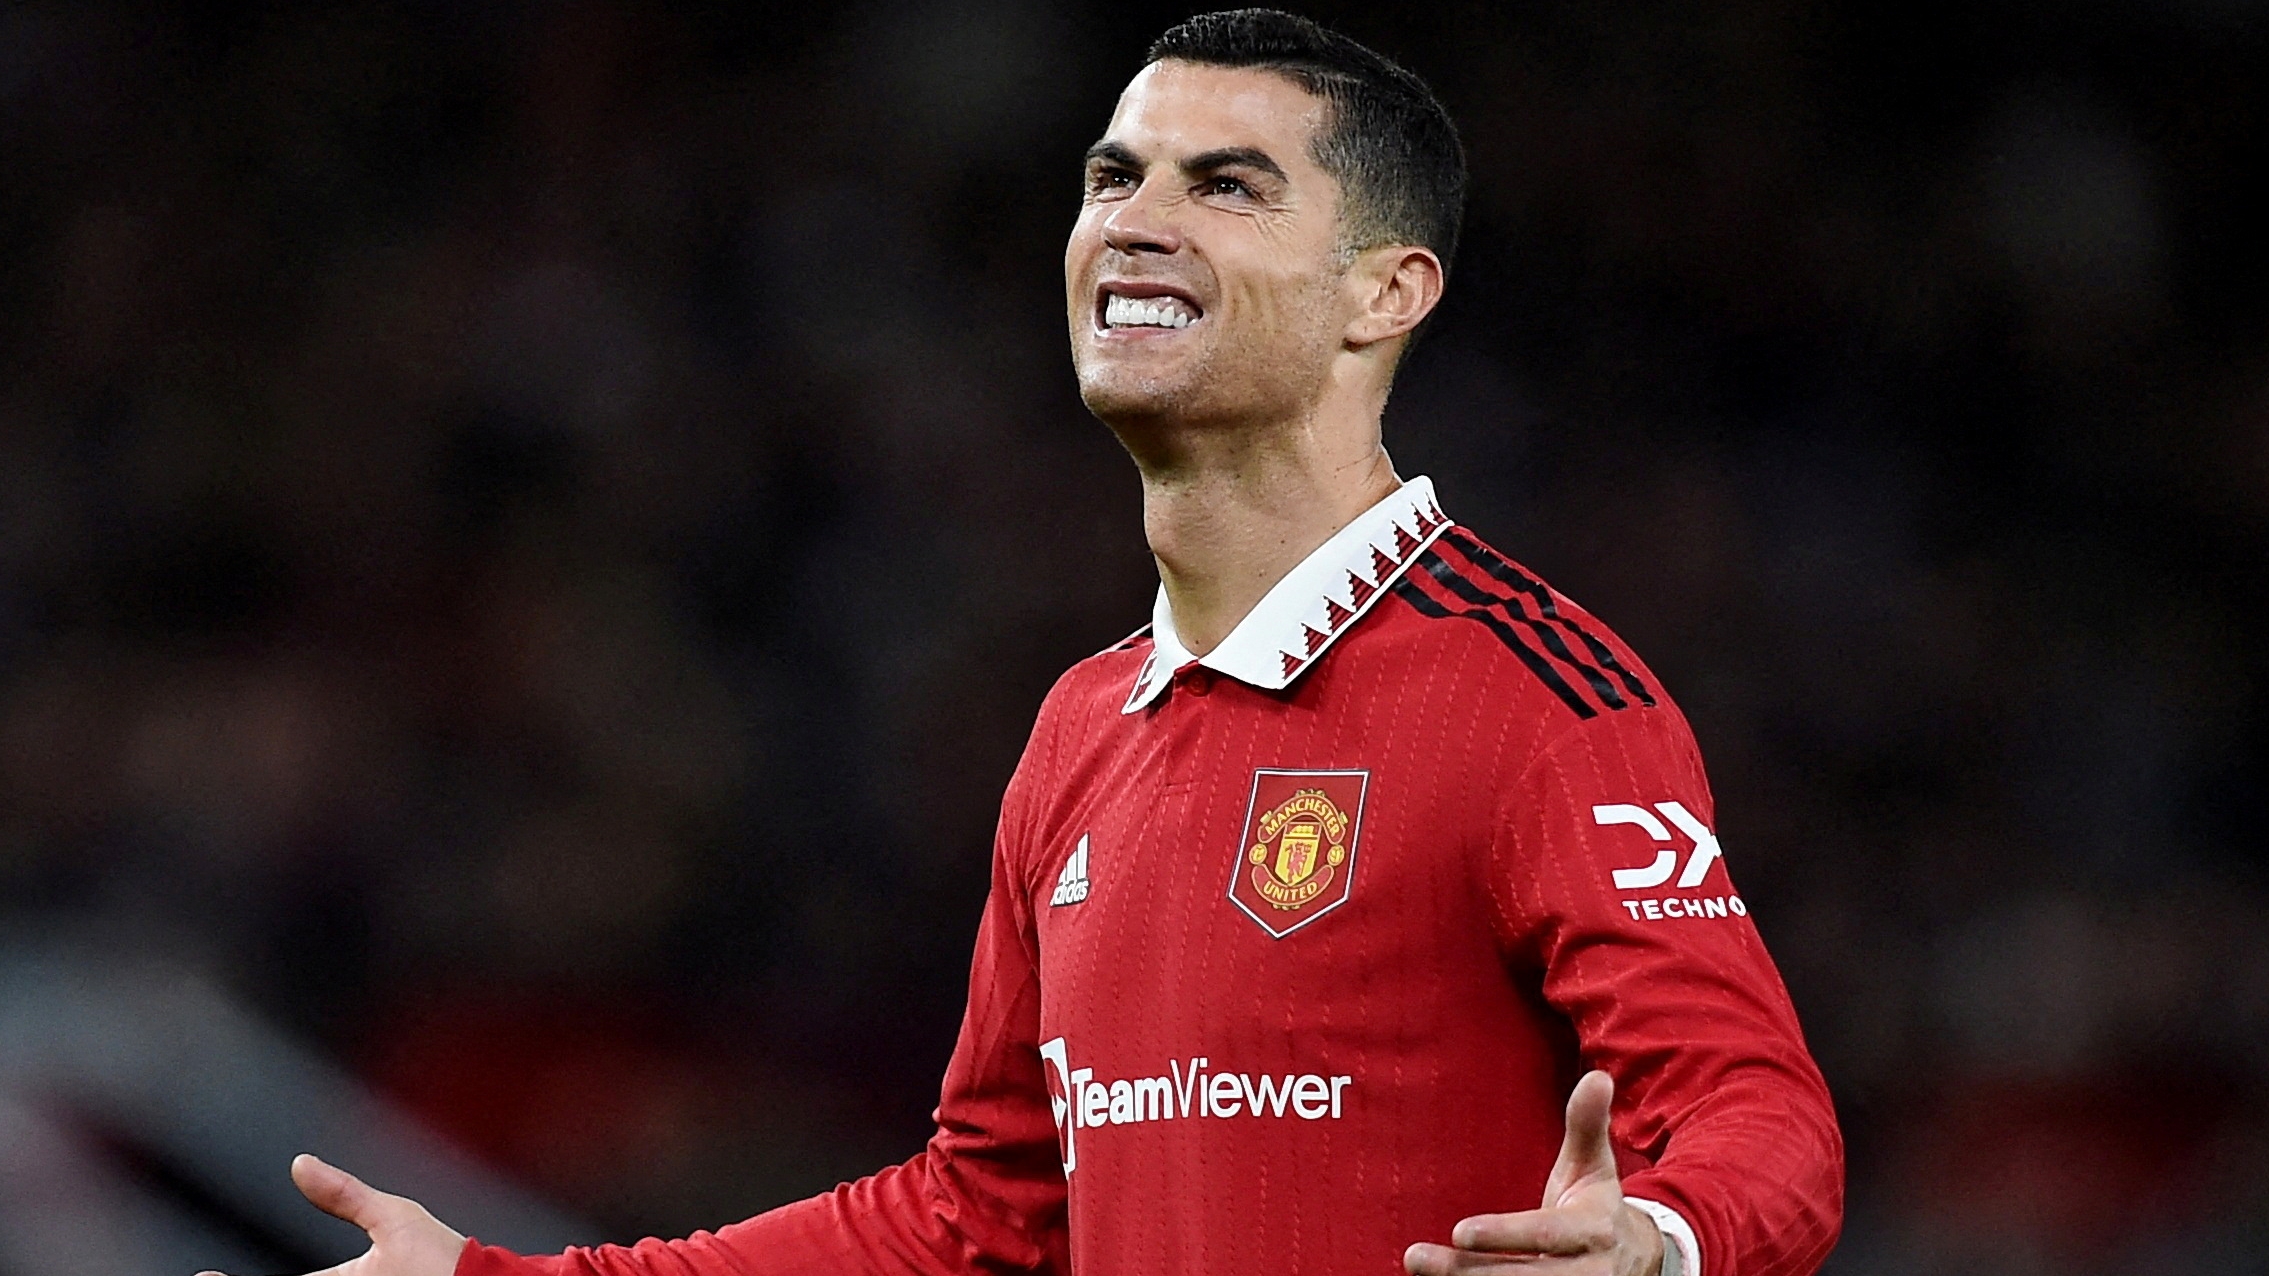 Cristiano Ronaldo could face a heavy economic fine after the interview he gave to English television in which he criticized Manchester United and its trainer (REUTERS/Peter Powell)